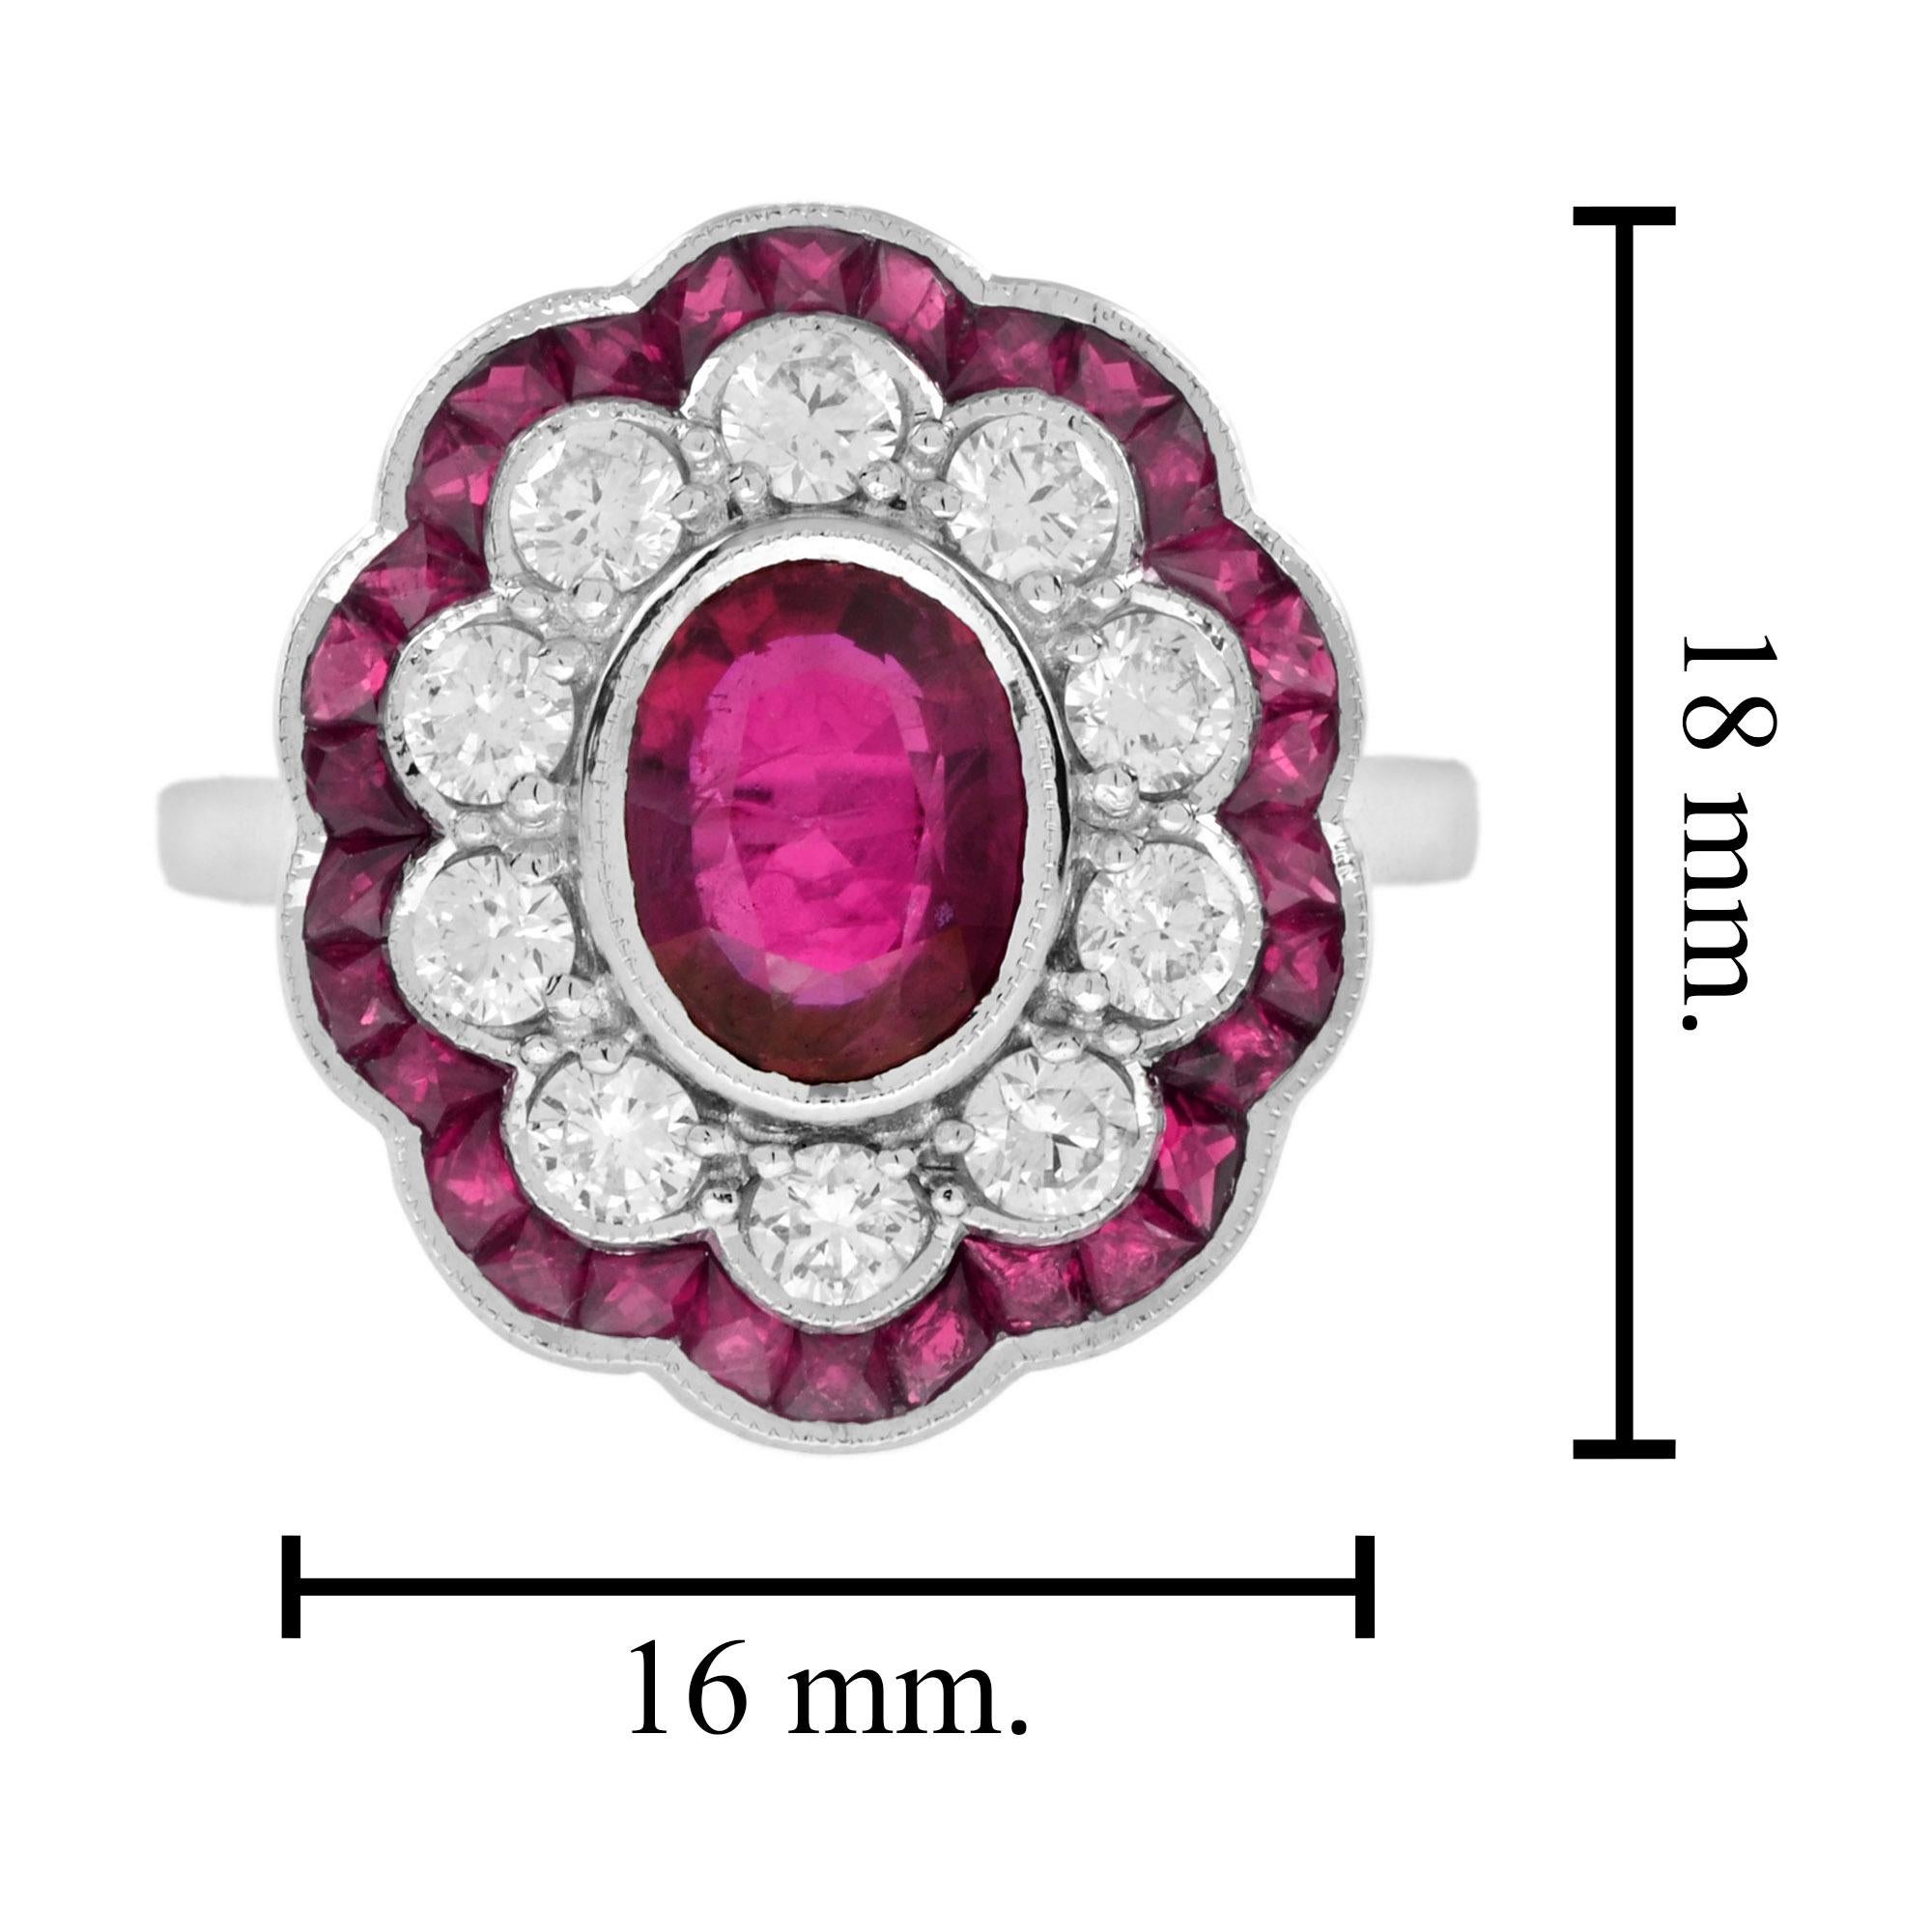 Women's Certified No Heated Siamese Ruby and Diamonds Cluster Ring in 18K White Gold